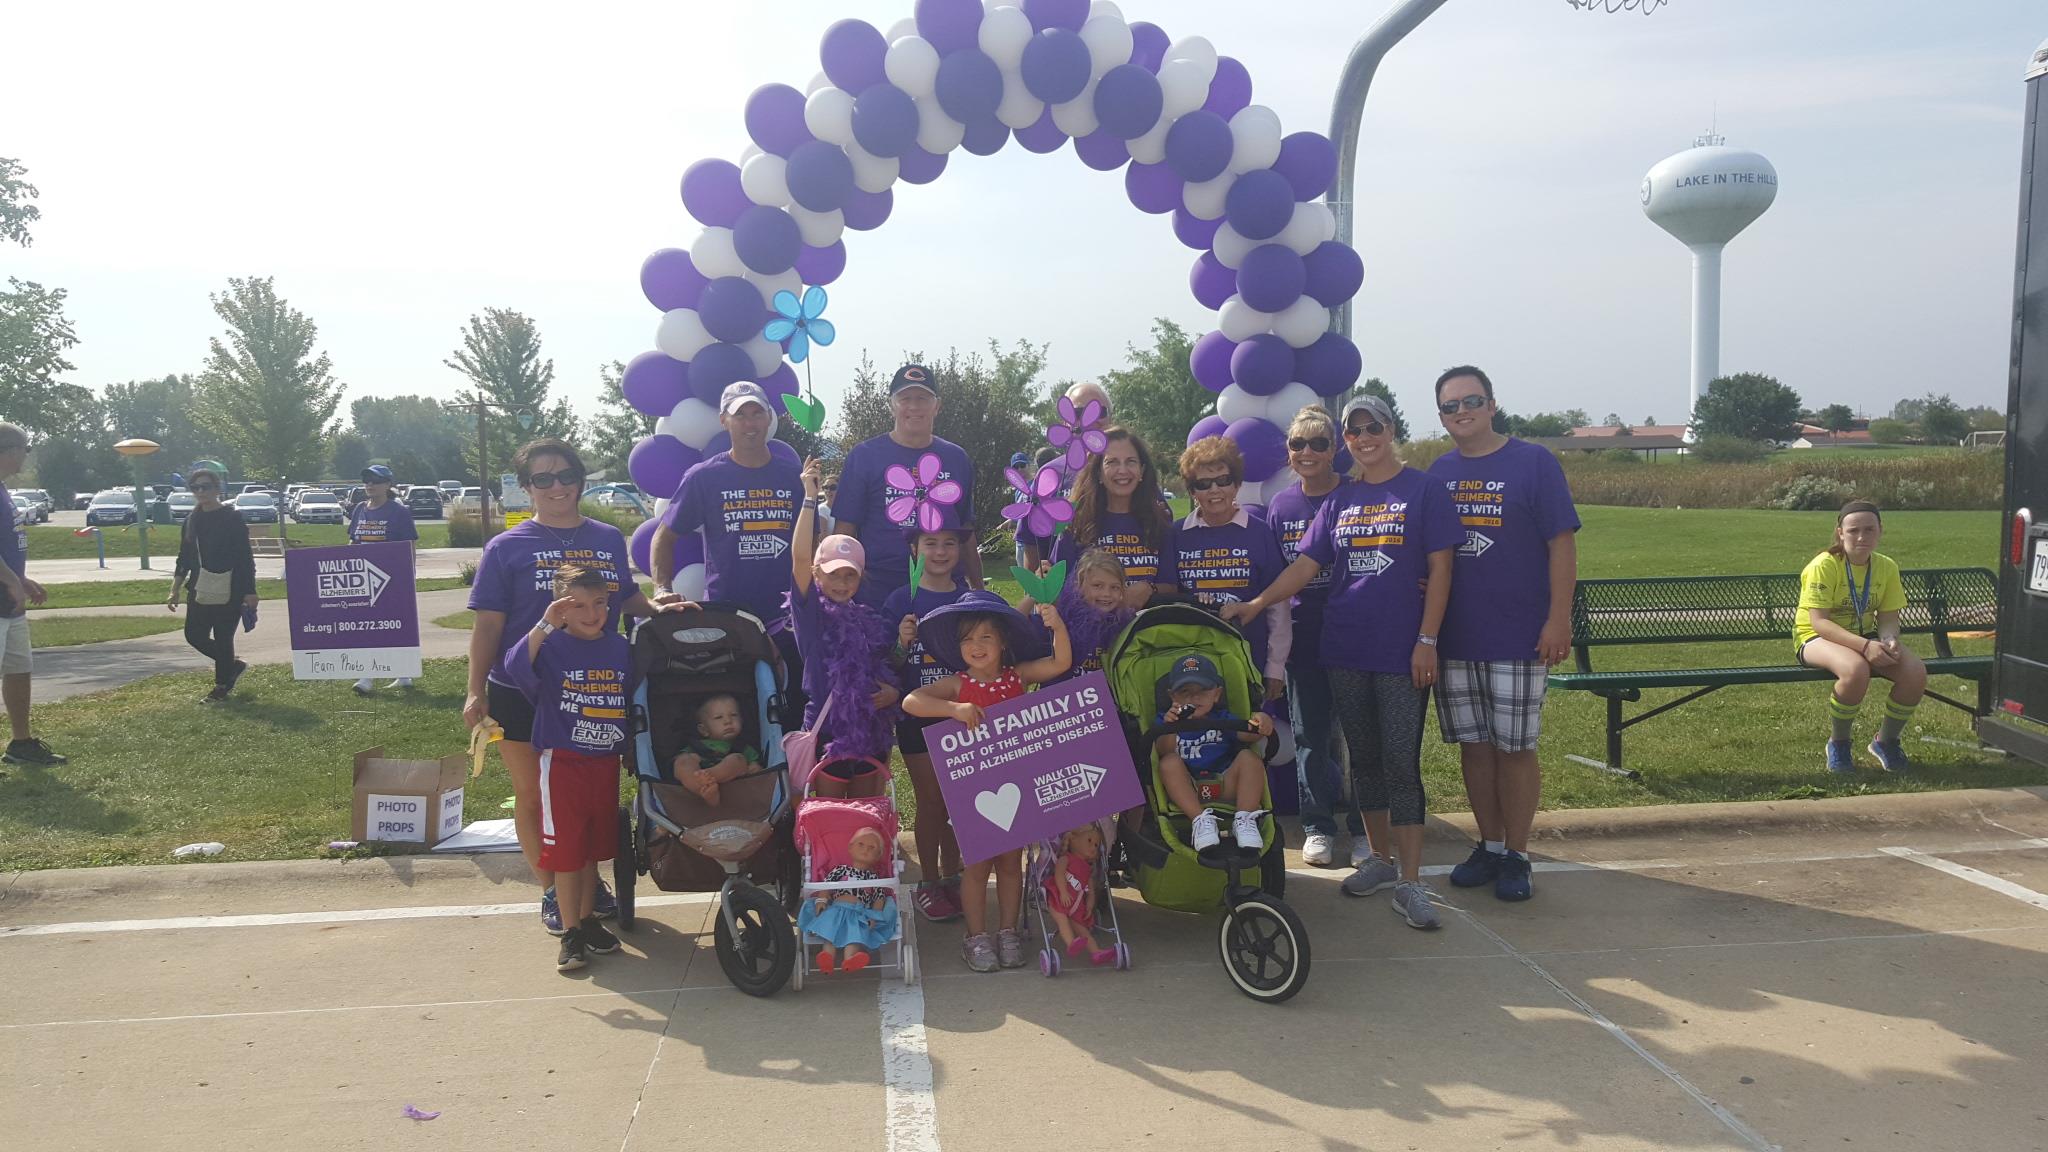 <h1 class="tribe-events-single-event-title">Walk to End Alzheimer’s Walk with Joe and Tina!</h1>